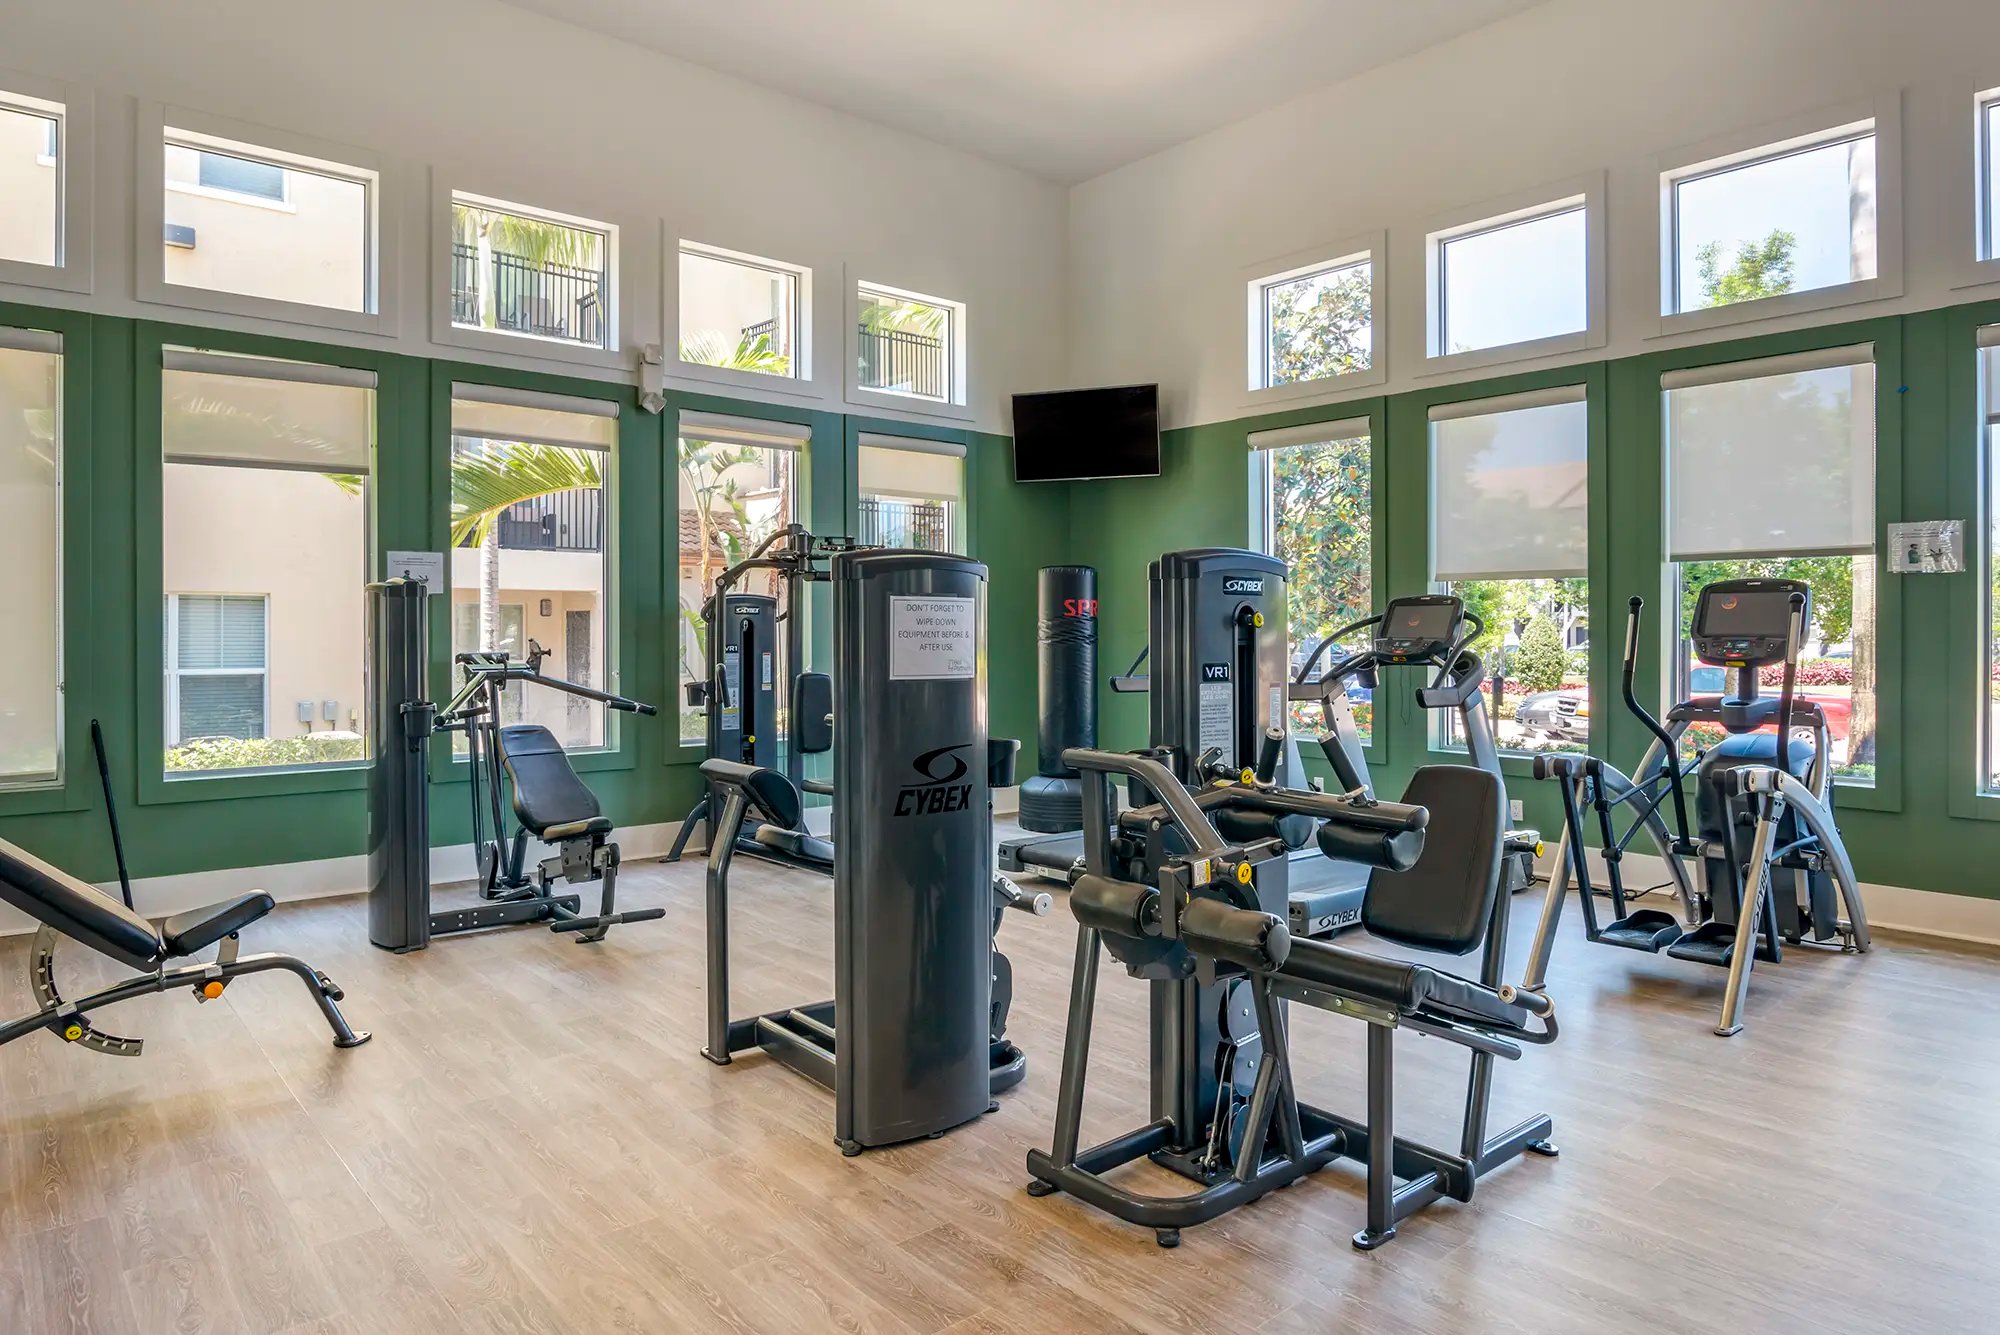 Fitness center with cardio equipment and strength training